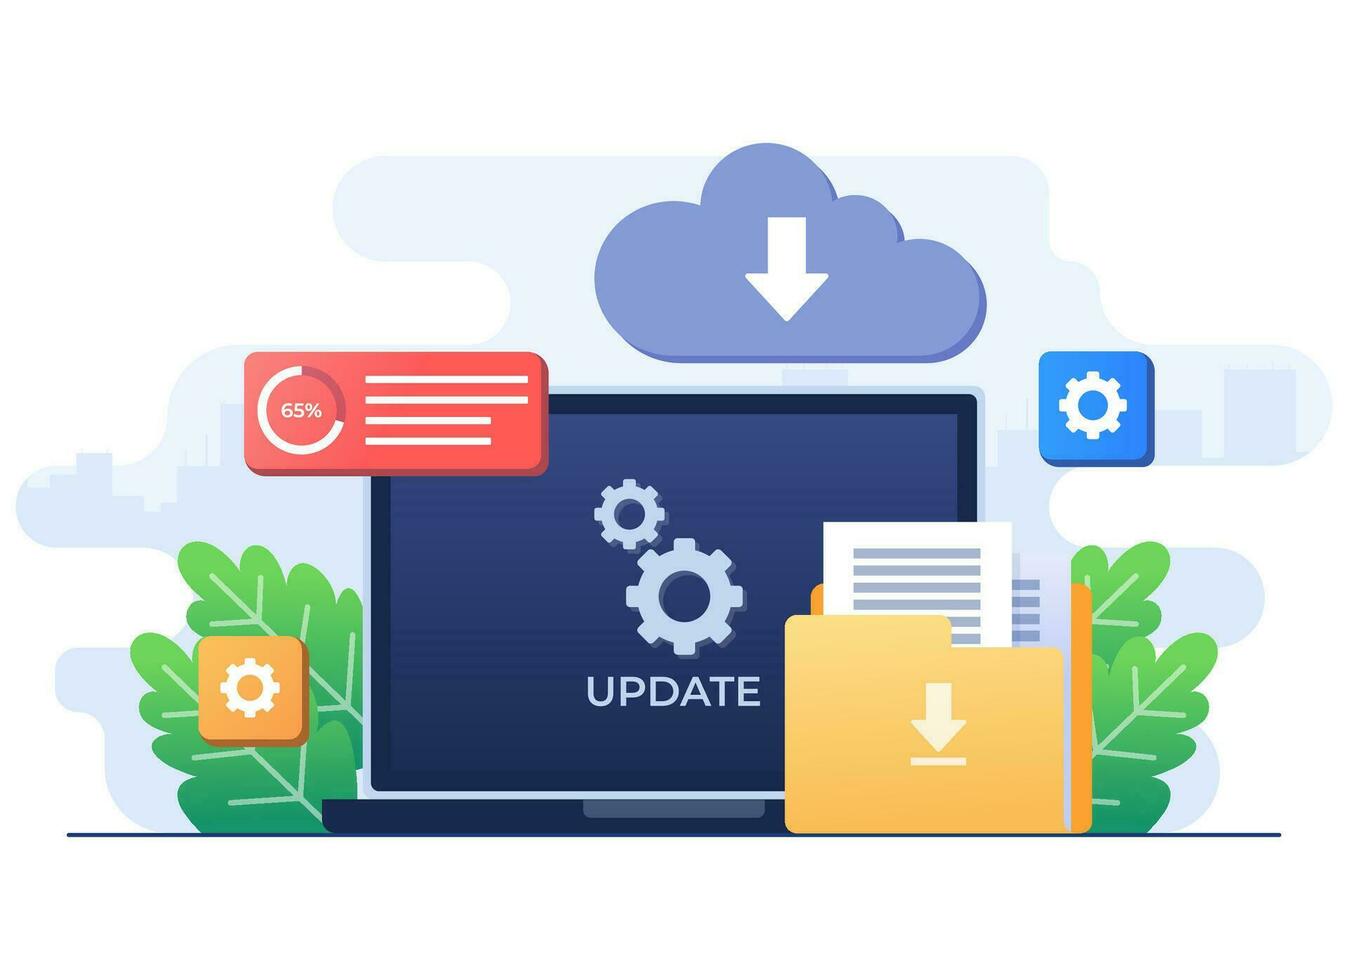 Upgrading operating system flat illustration, System update, System maintenance, Update program and application, Error fixing, troubleshooting, Device update, Software upgrade process vector